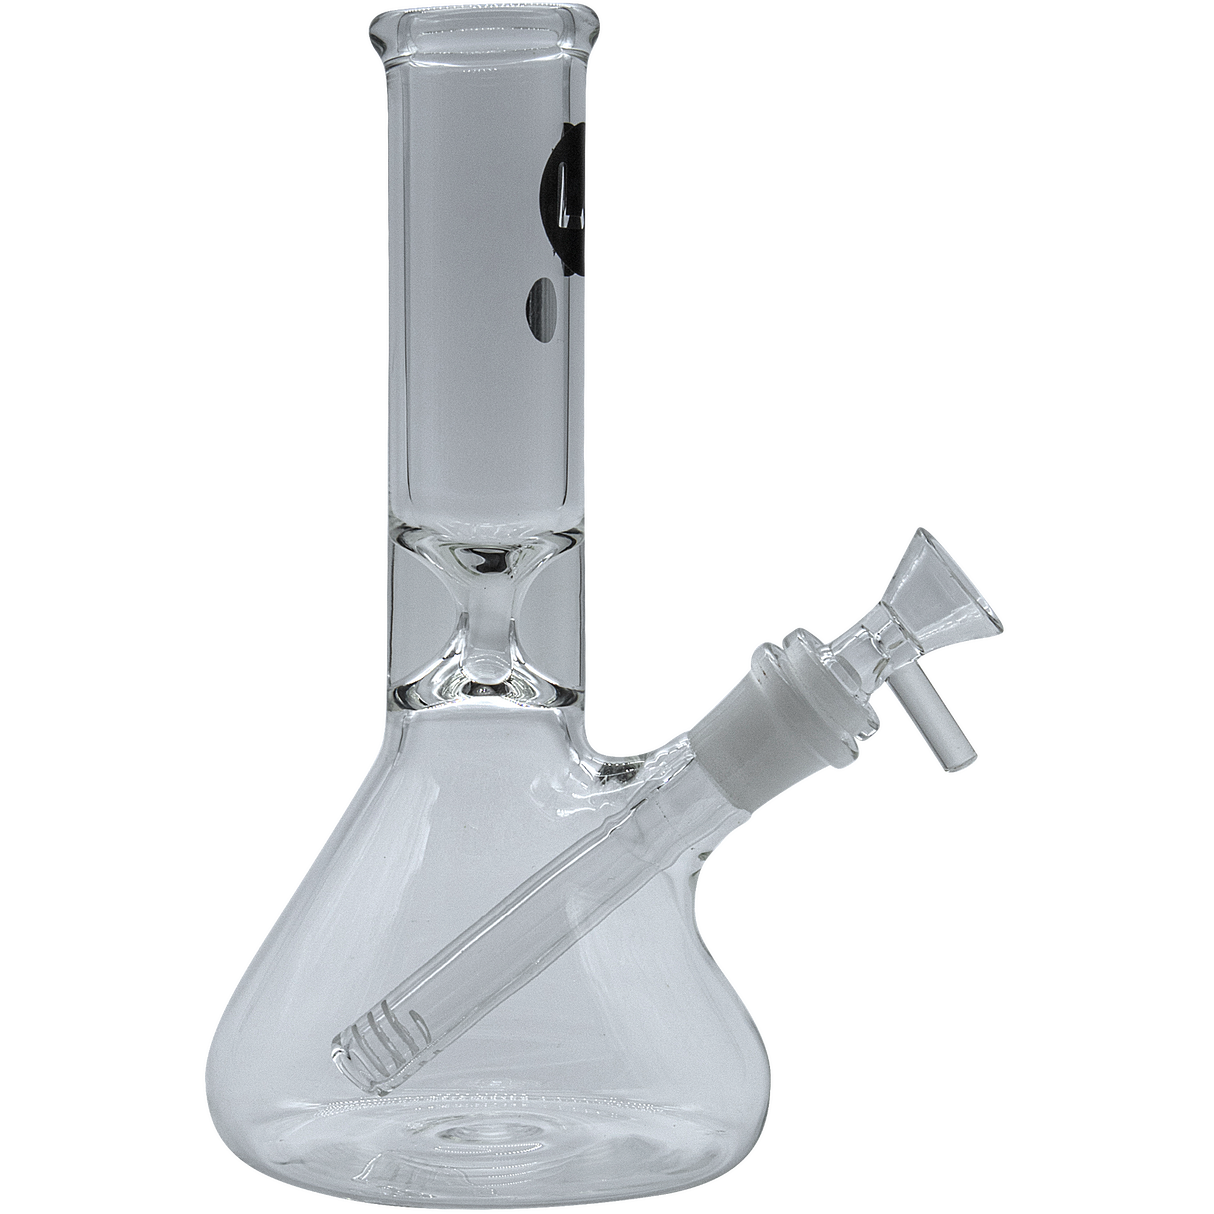 LA Pipes "Shortstop" Beaker Bong in Borosilicate Glass, 10" Height, Front View